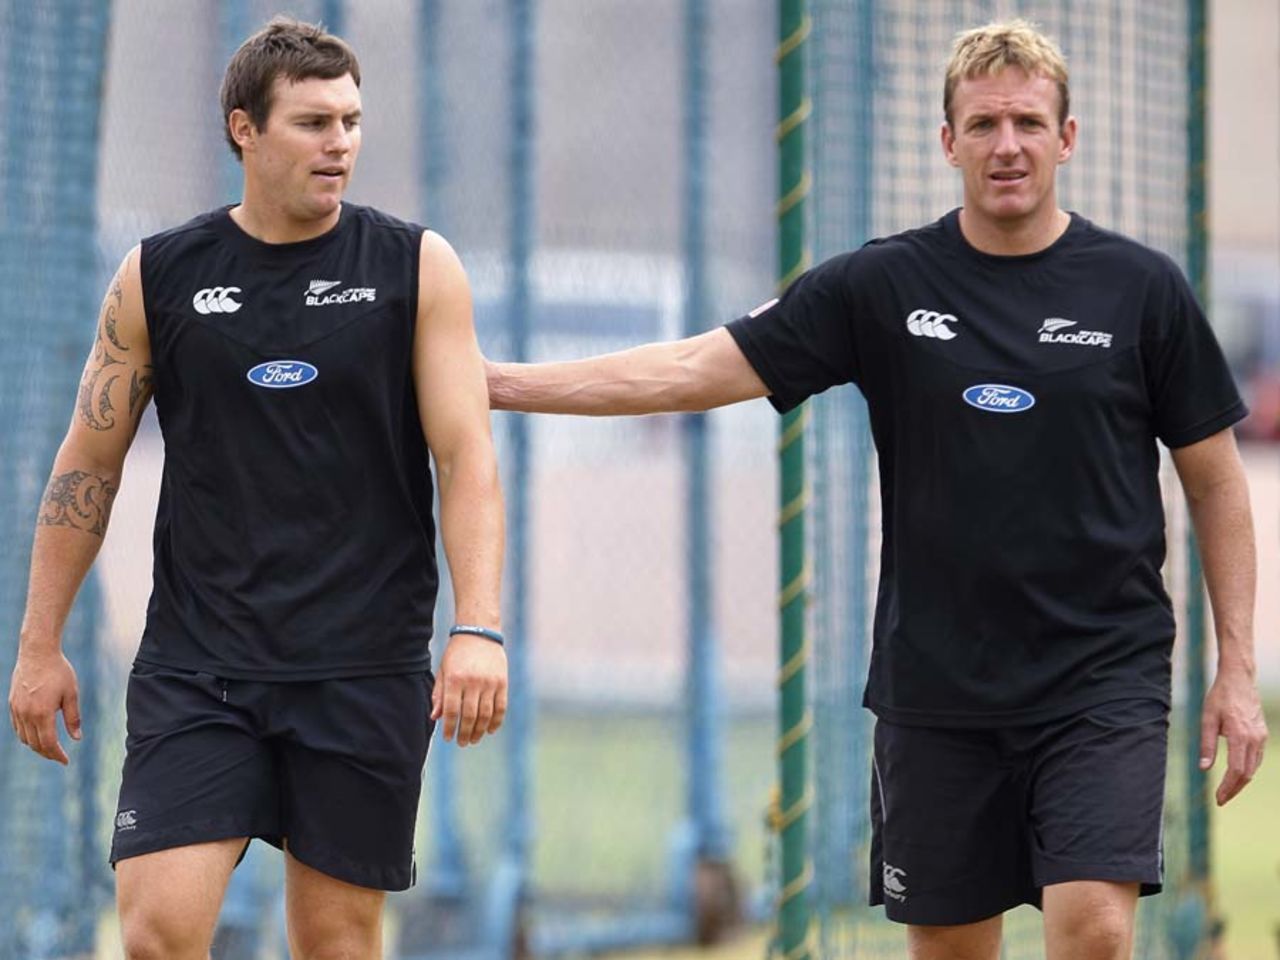 Doug Bracewell and Damien Wright at a training session, Bangalore, August 29, 2012